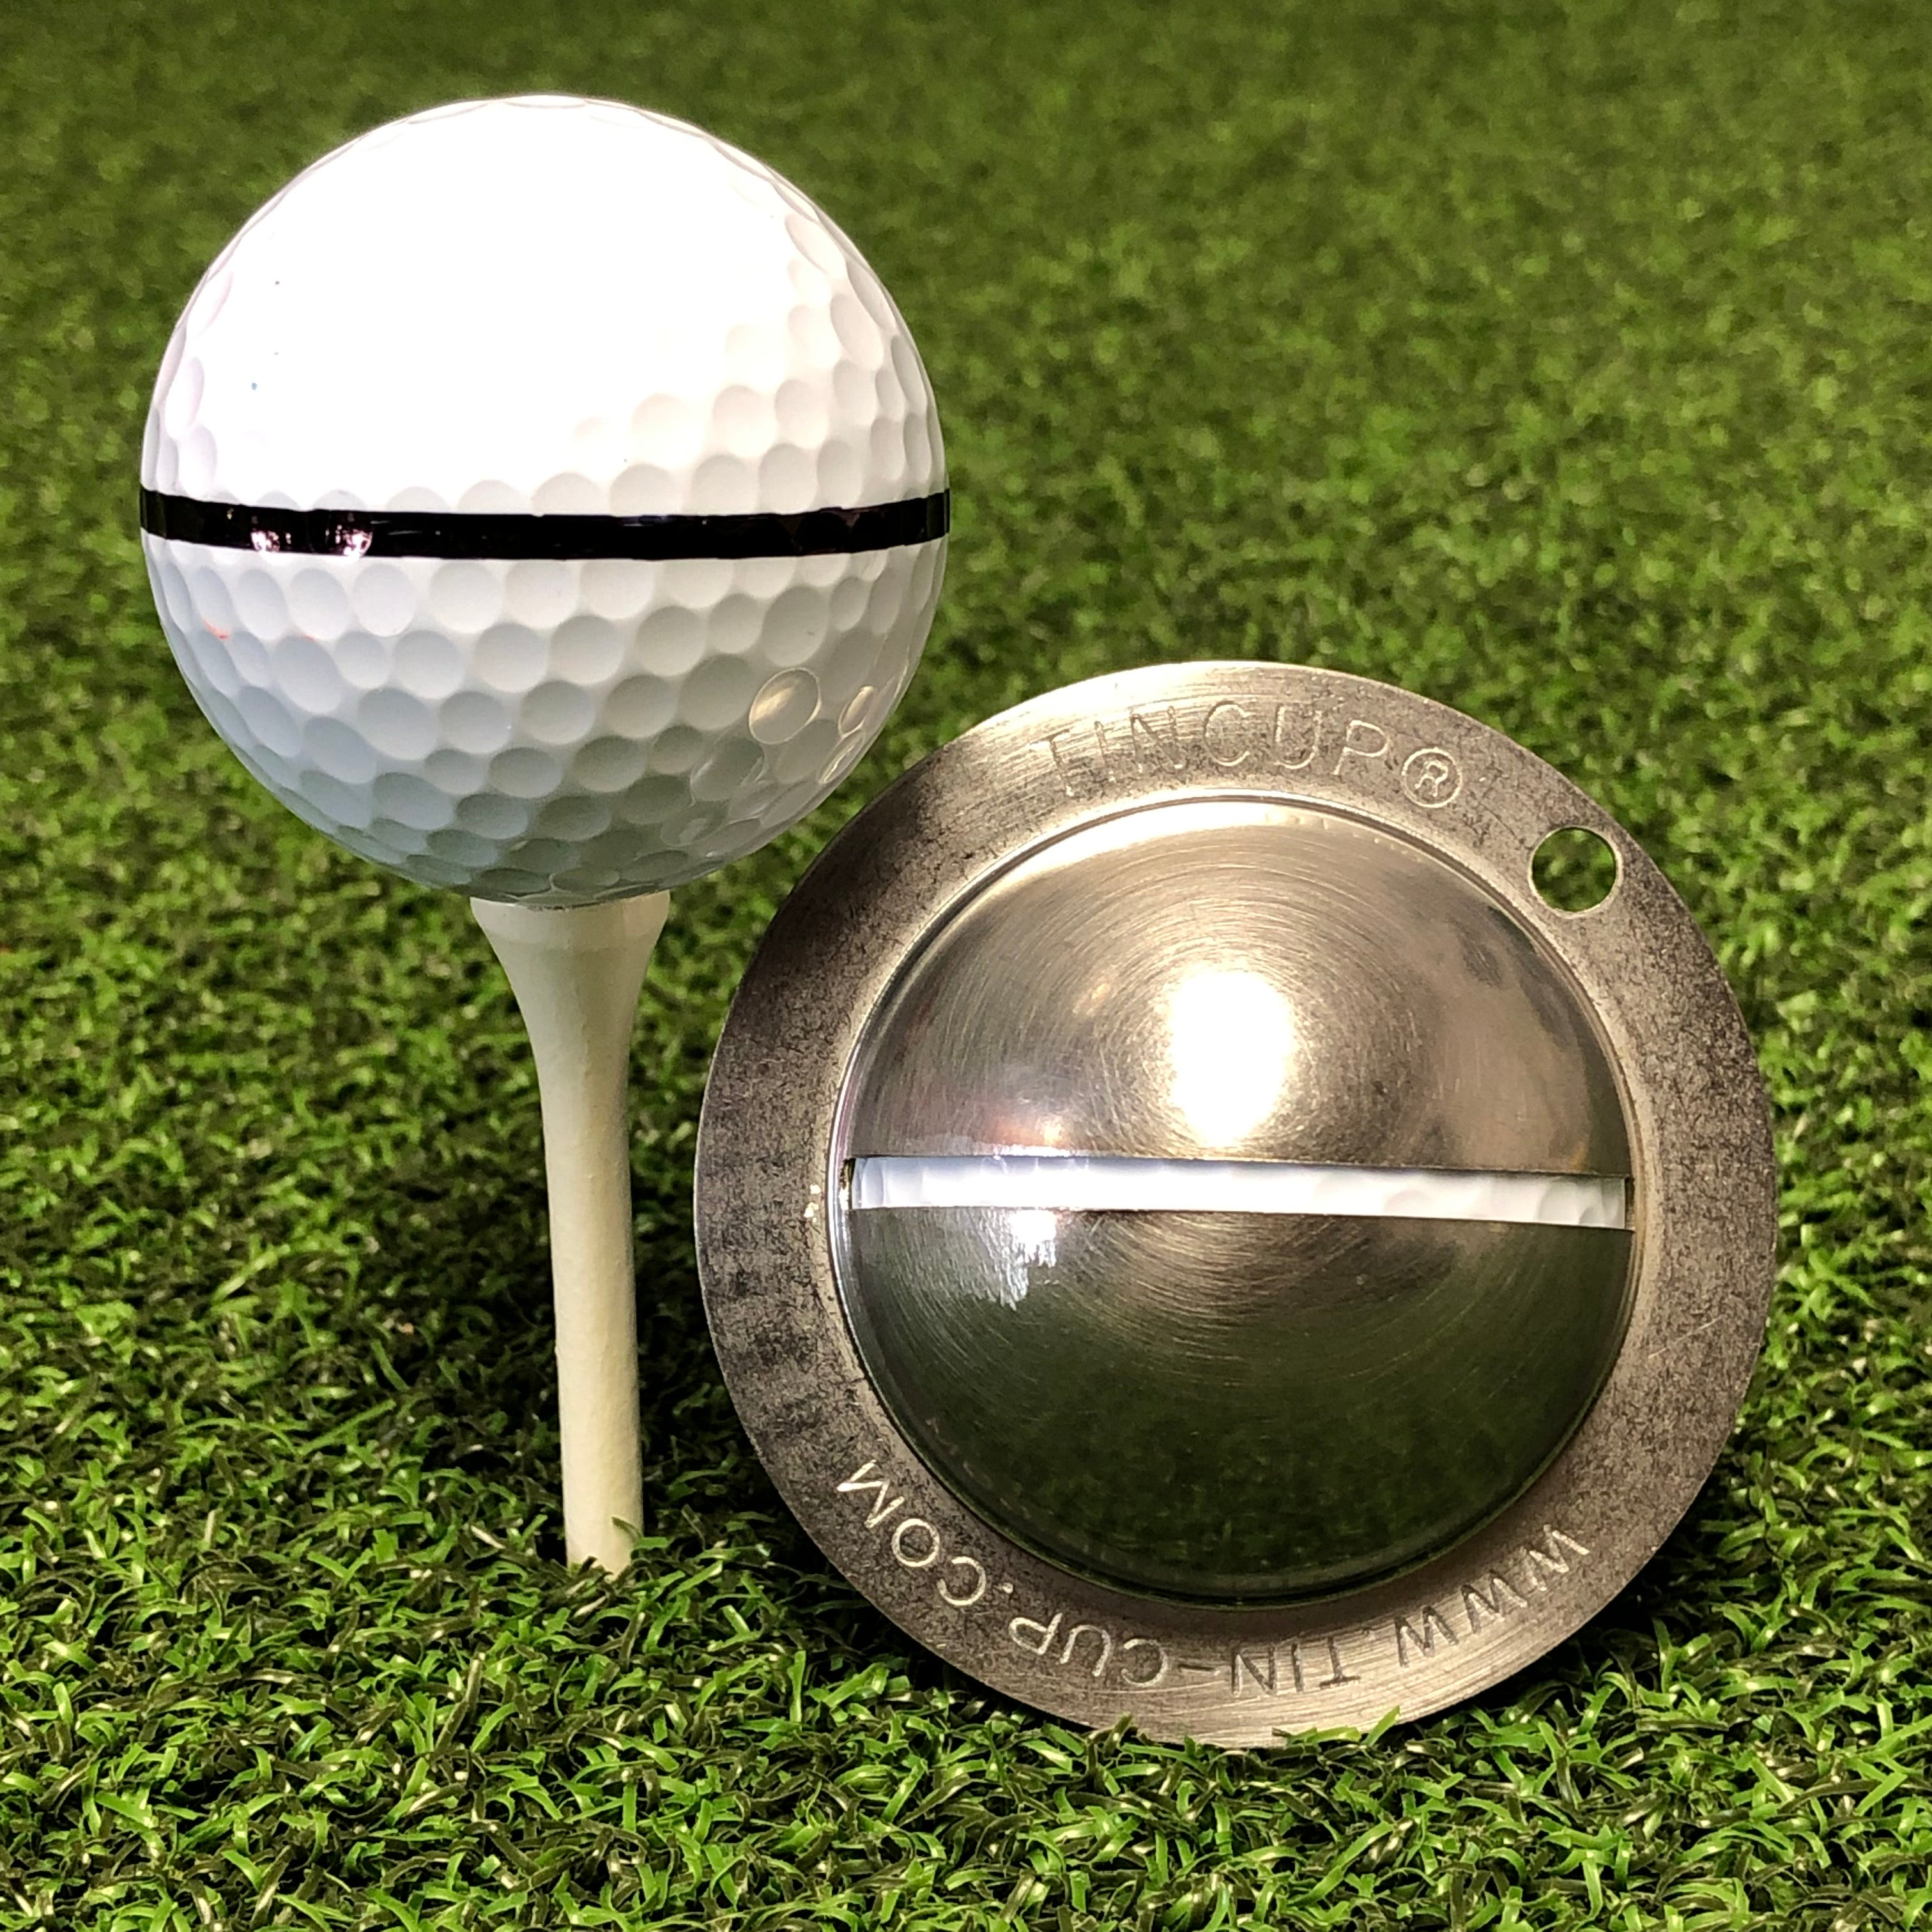 Tour Line – Tin Cup Products